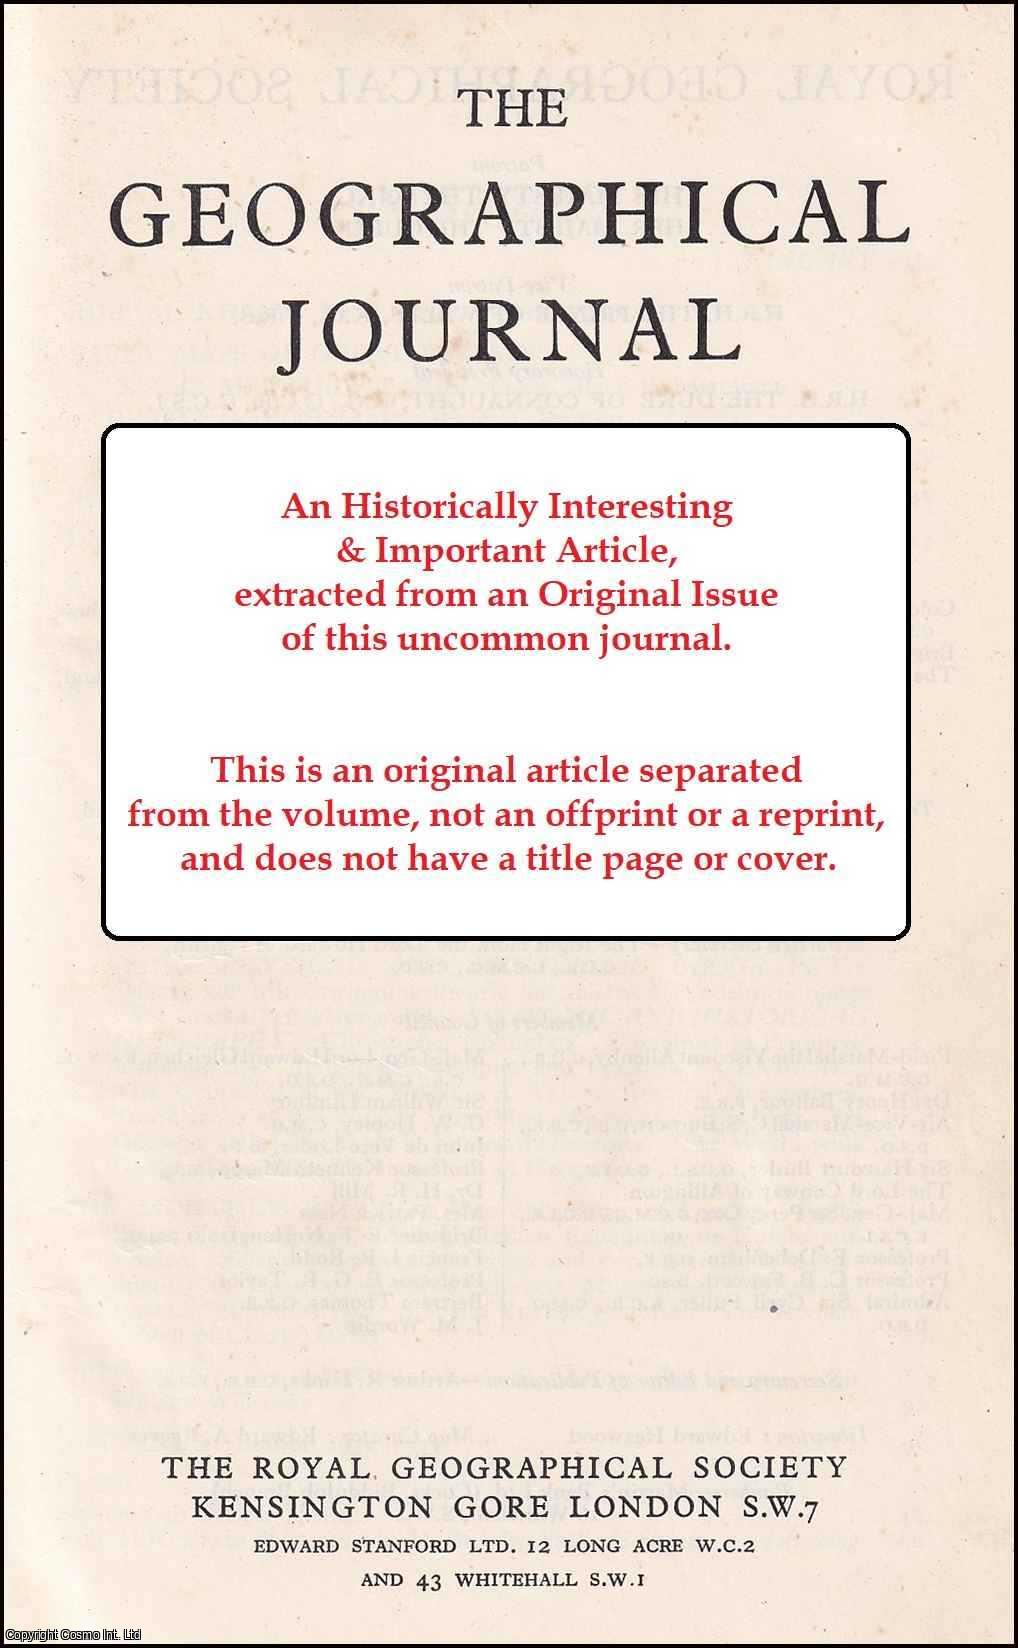 James A. Casada - Sir Harry H. Johnson as a Geographer. An original article from the Geographical Journal, 1977.